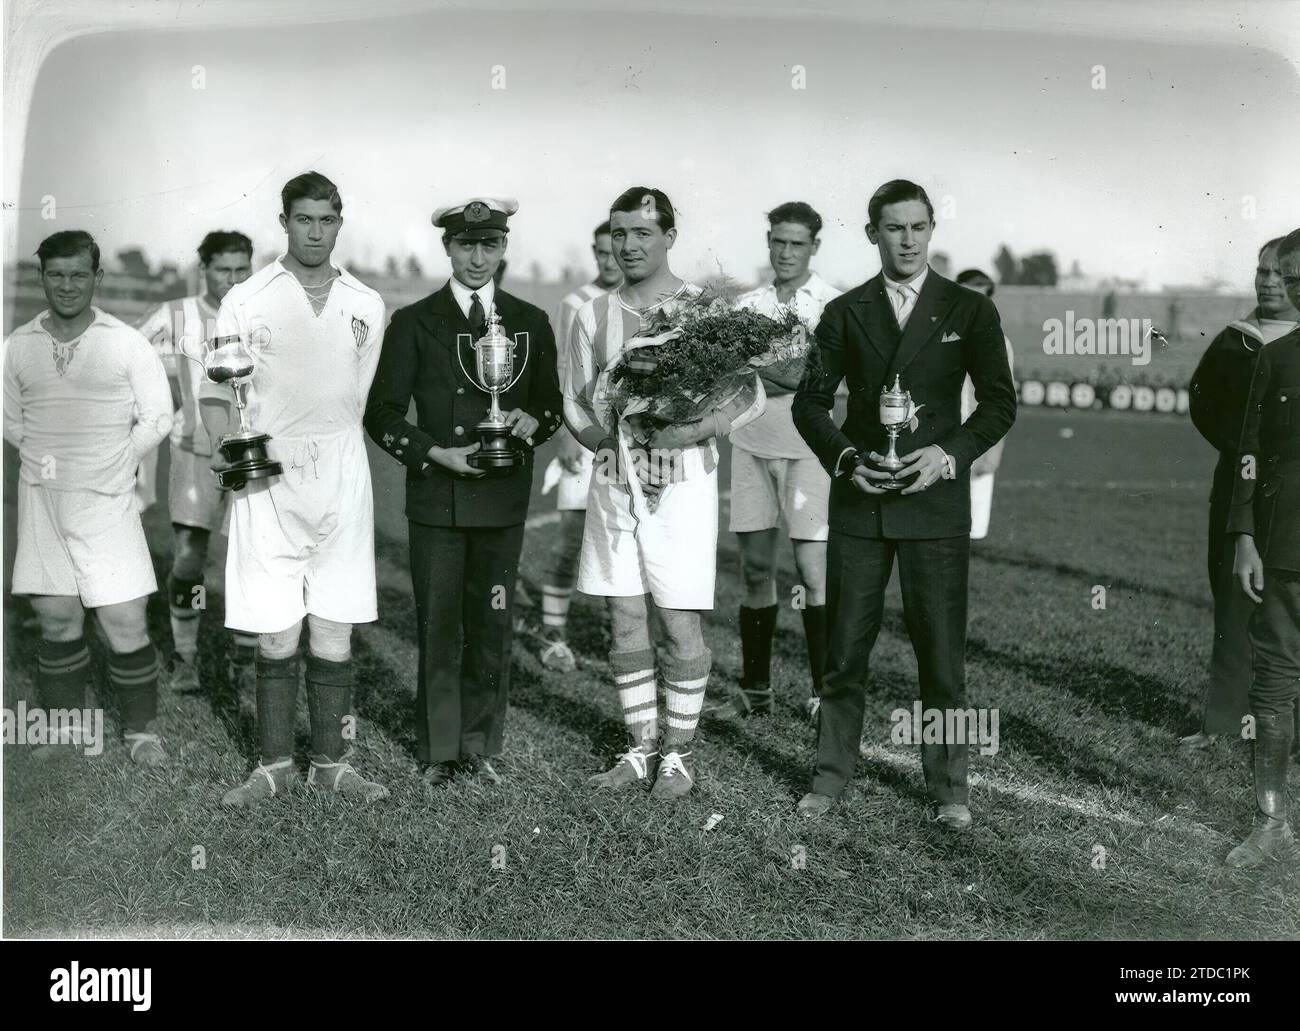 Delivery Trofes .Delivery of Trophies.- delivery of Trophies in the Nervión field, of Sevilla FC This venue was inaugurated on October 7, 1928. It was built on a plot owned by Pablo Armero. Credit: Album / Archivo ABC / Cecilio Sánchez Del Pando Stock Photo